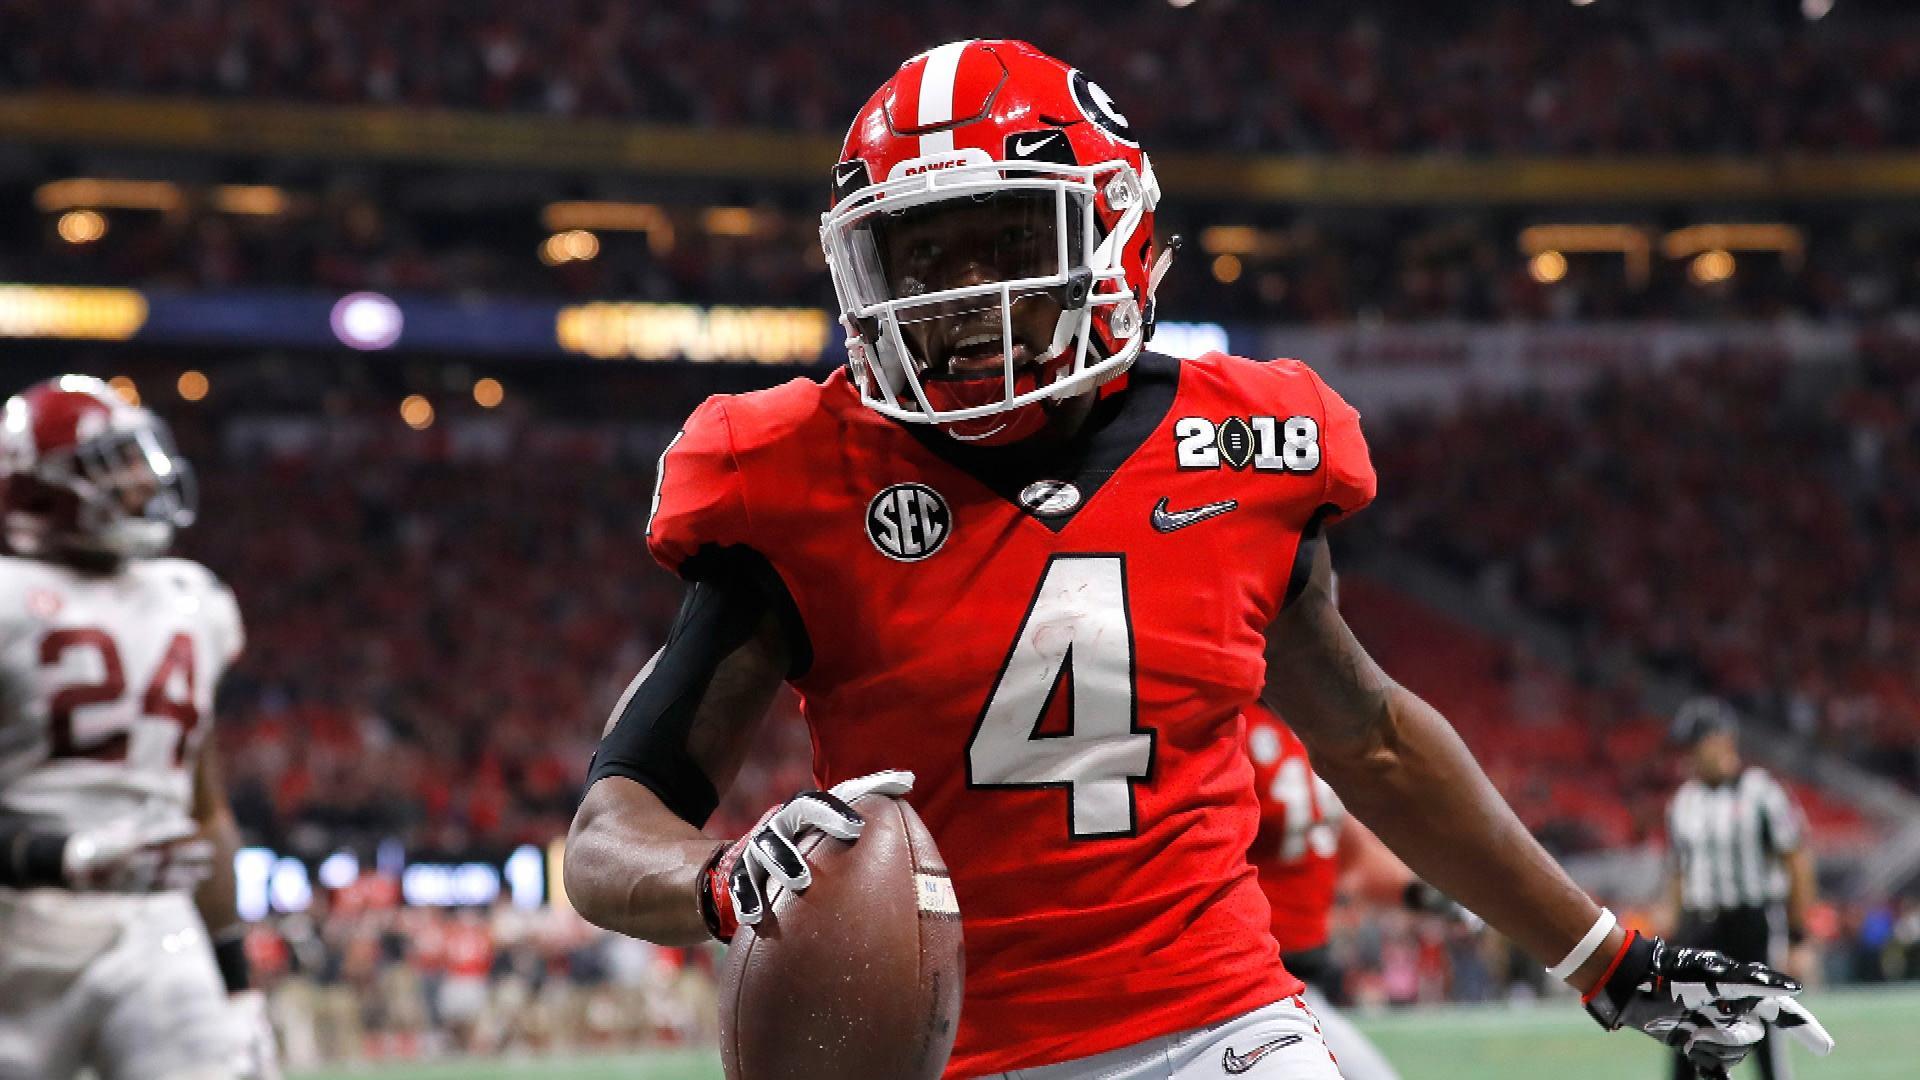 Was Mecole Hardman drafted by Kansas City Chiefs to replace Tyreek Hill?